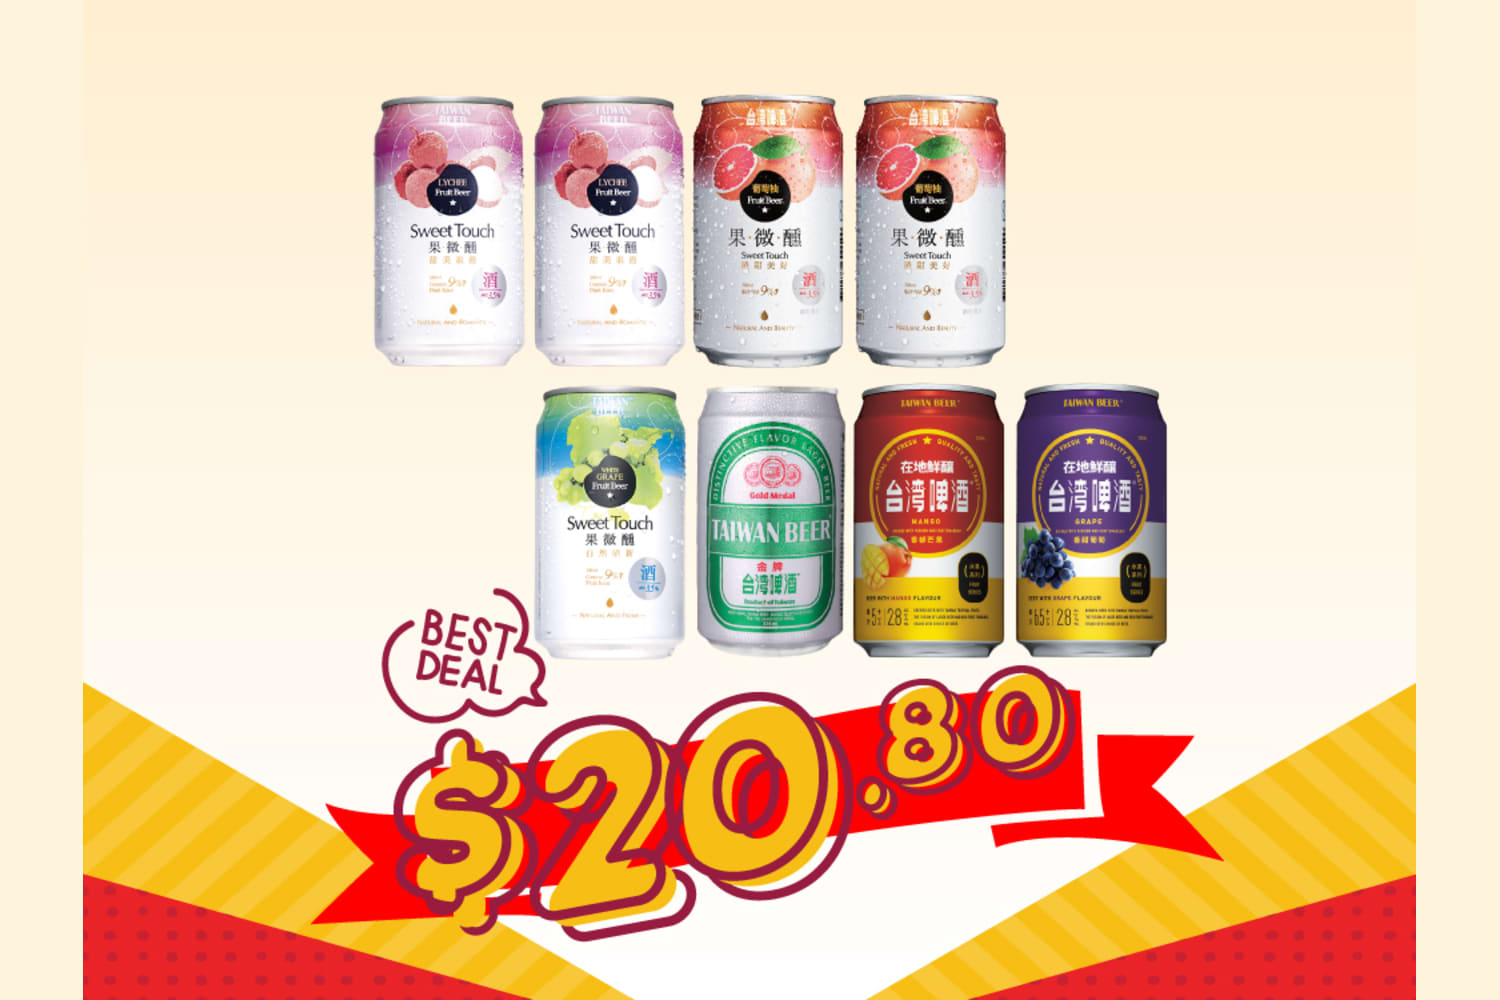 8 x Assorted Taiwan Beer - limited stock at OleOle Singapore Confectionery & Liquor - Get Deals, Cashback and Rewards with ShopBack GO